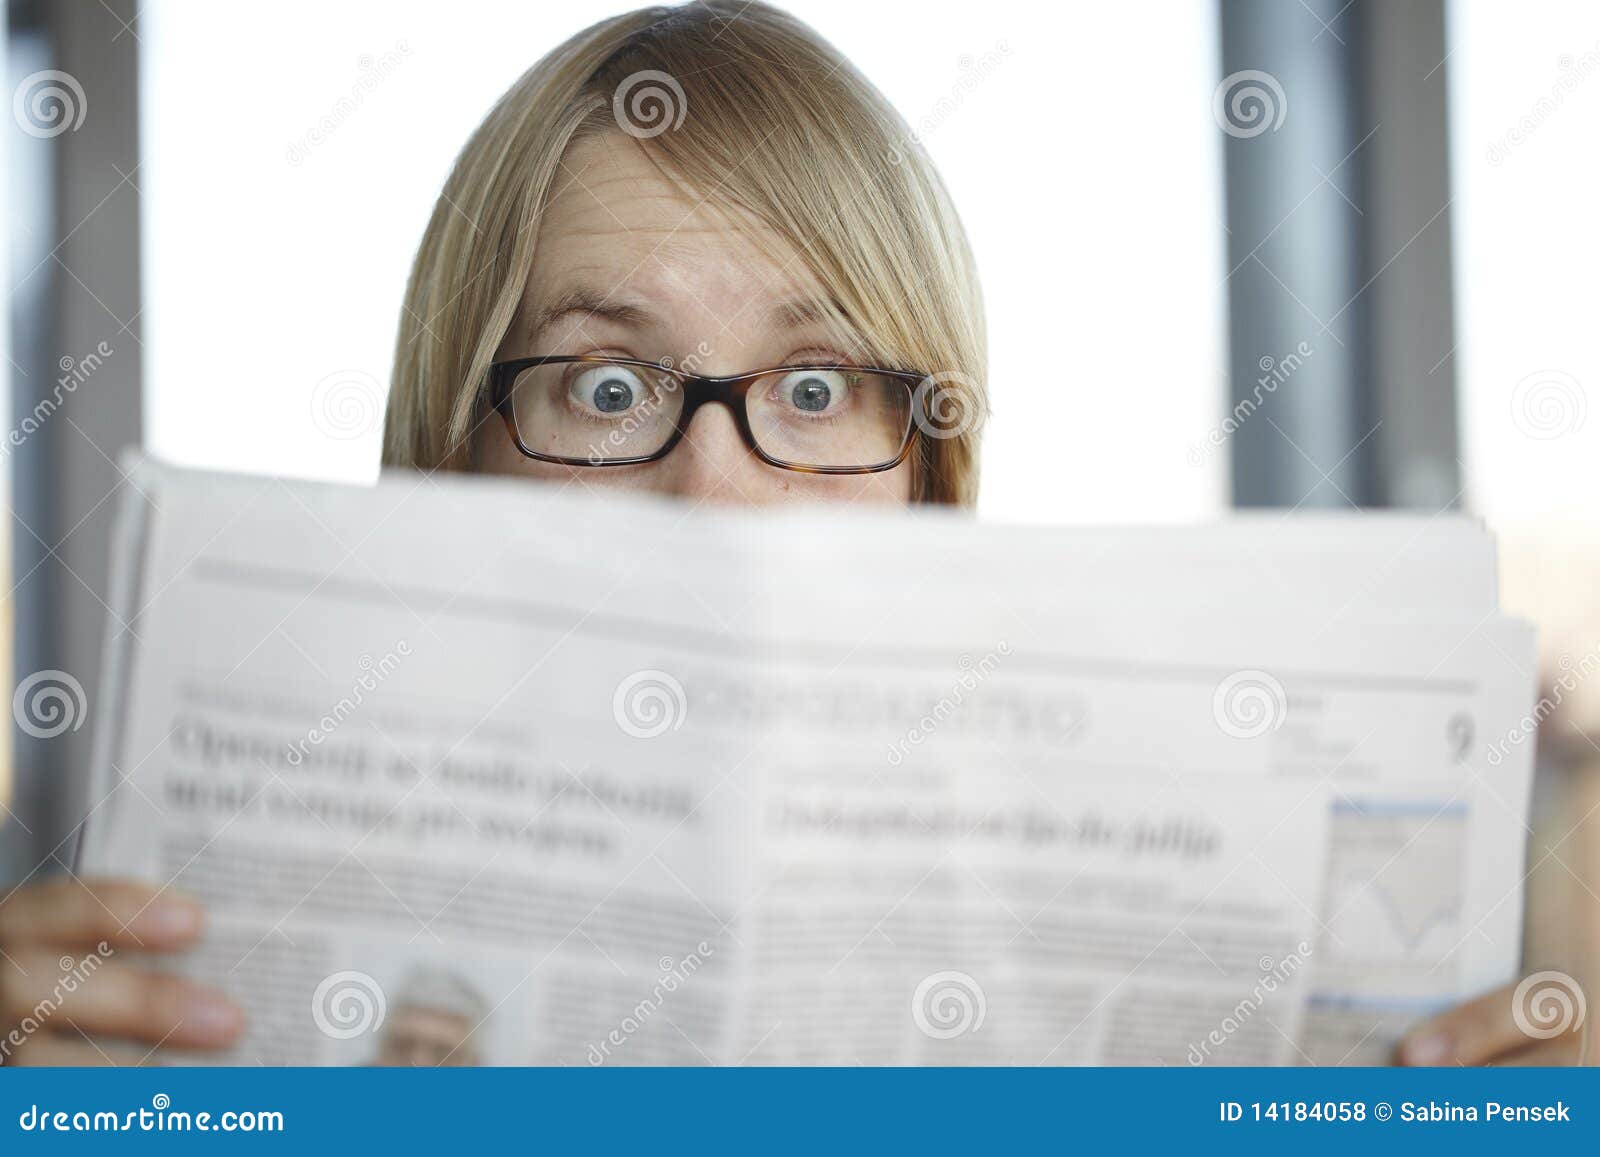 Surprised Woman With Glasses Reading A Newspaper Stock Photo Image Of